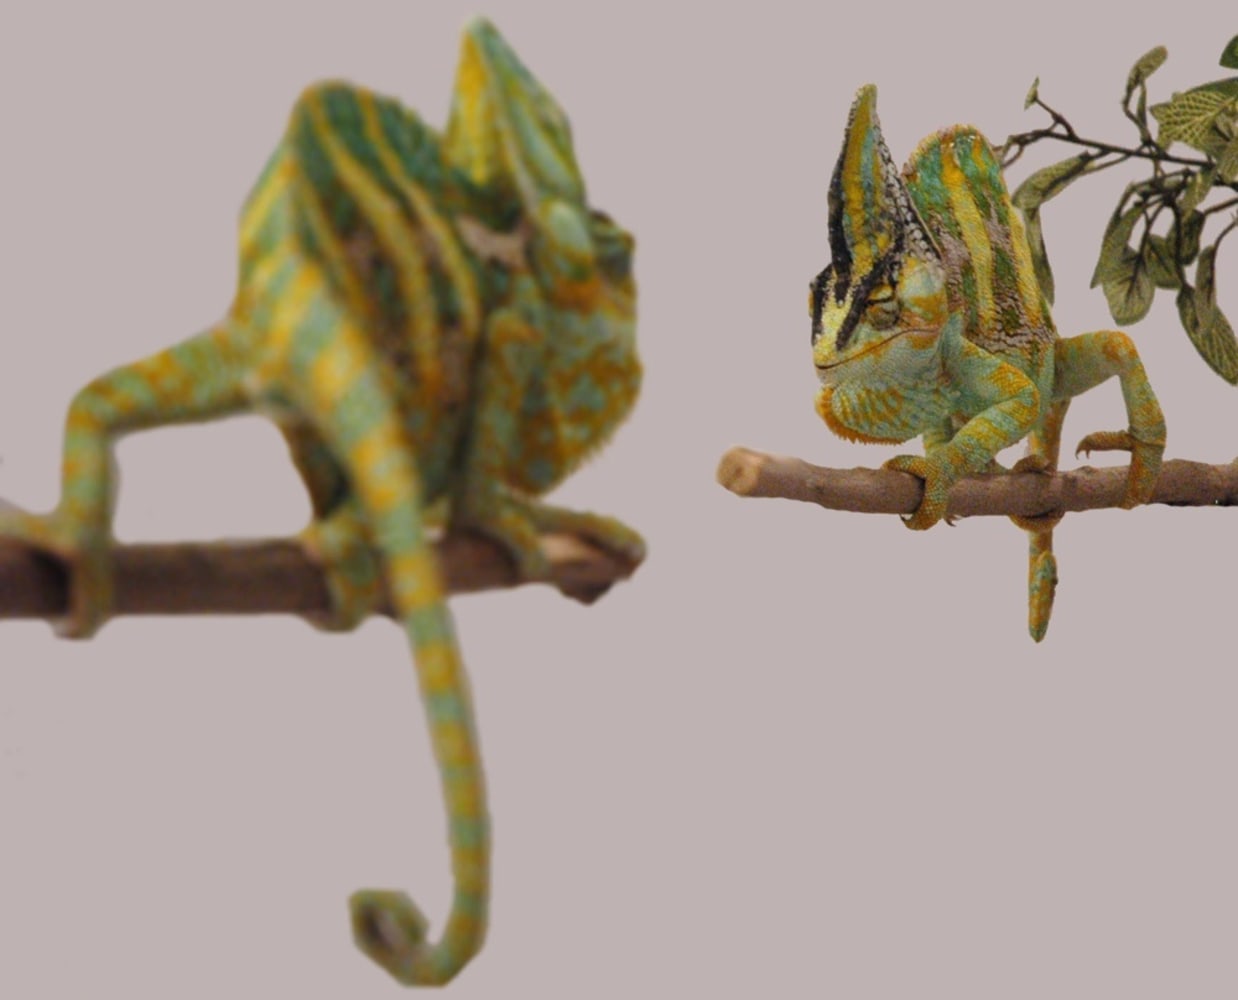 Trippy! Chameleons intimidate rivals with quick color change - NBC News